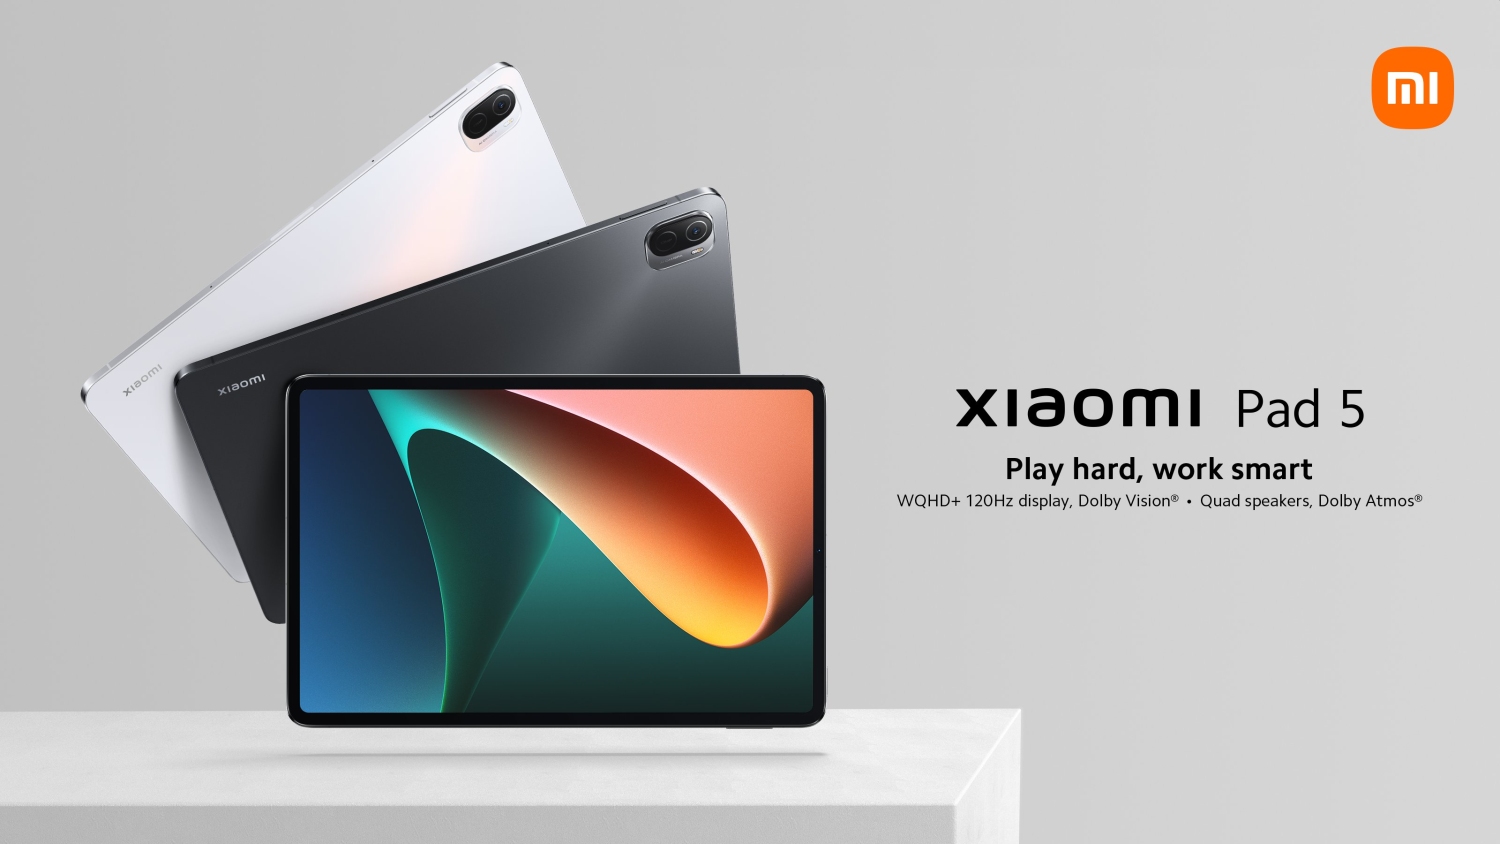 The Xiaomi Pad 5 is probably the best Android tablet priced under